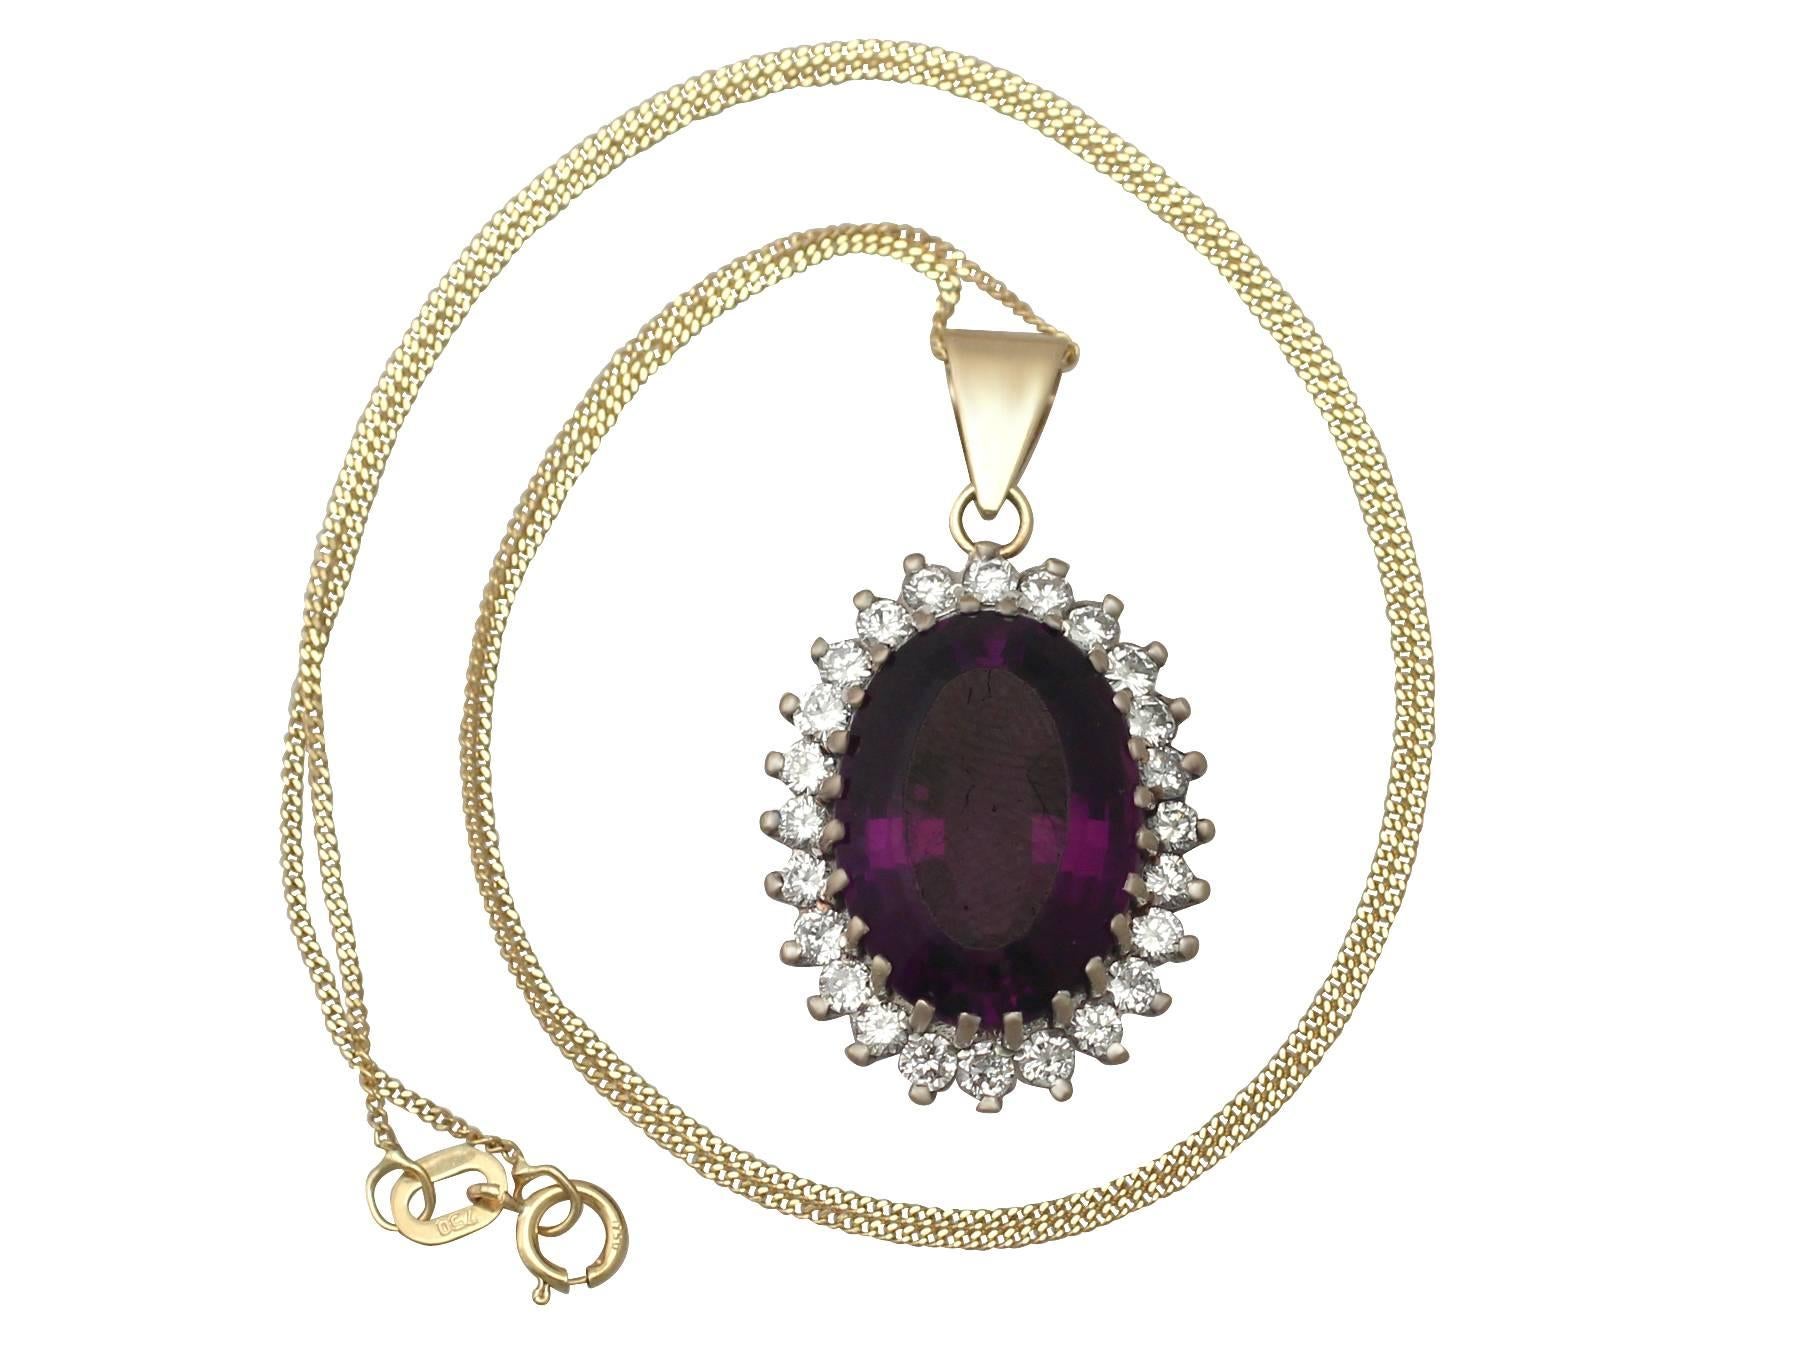 A fine and impressive vintage 11.50 carat amethyst and 0.96 carat diamond, 15k yellow gold and 15k white gold set cluster pendant; part of our diverse vintage jewellery and estate jewelry collections.

This fine and impressive amethyst pendant has